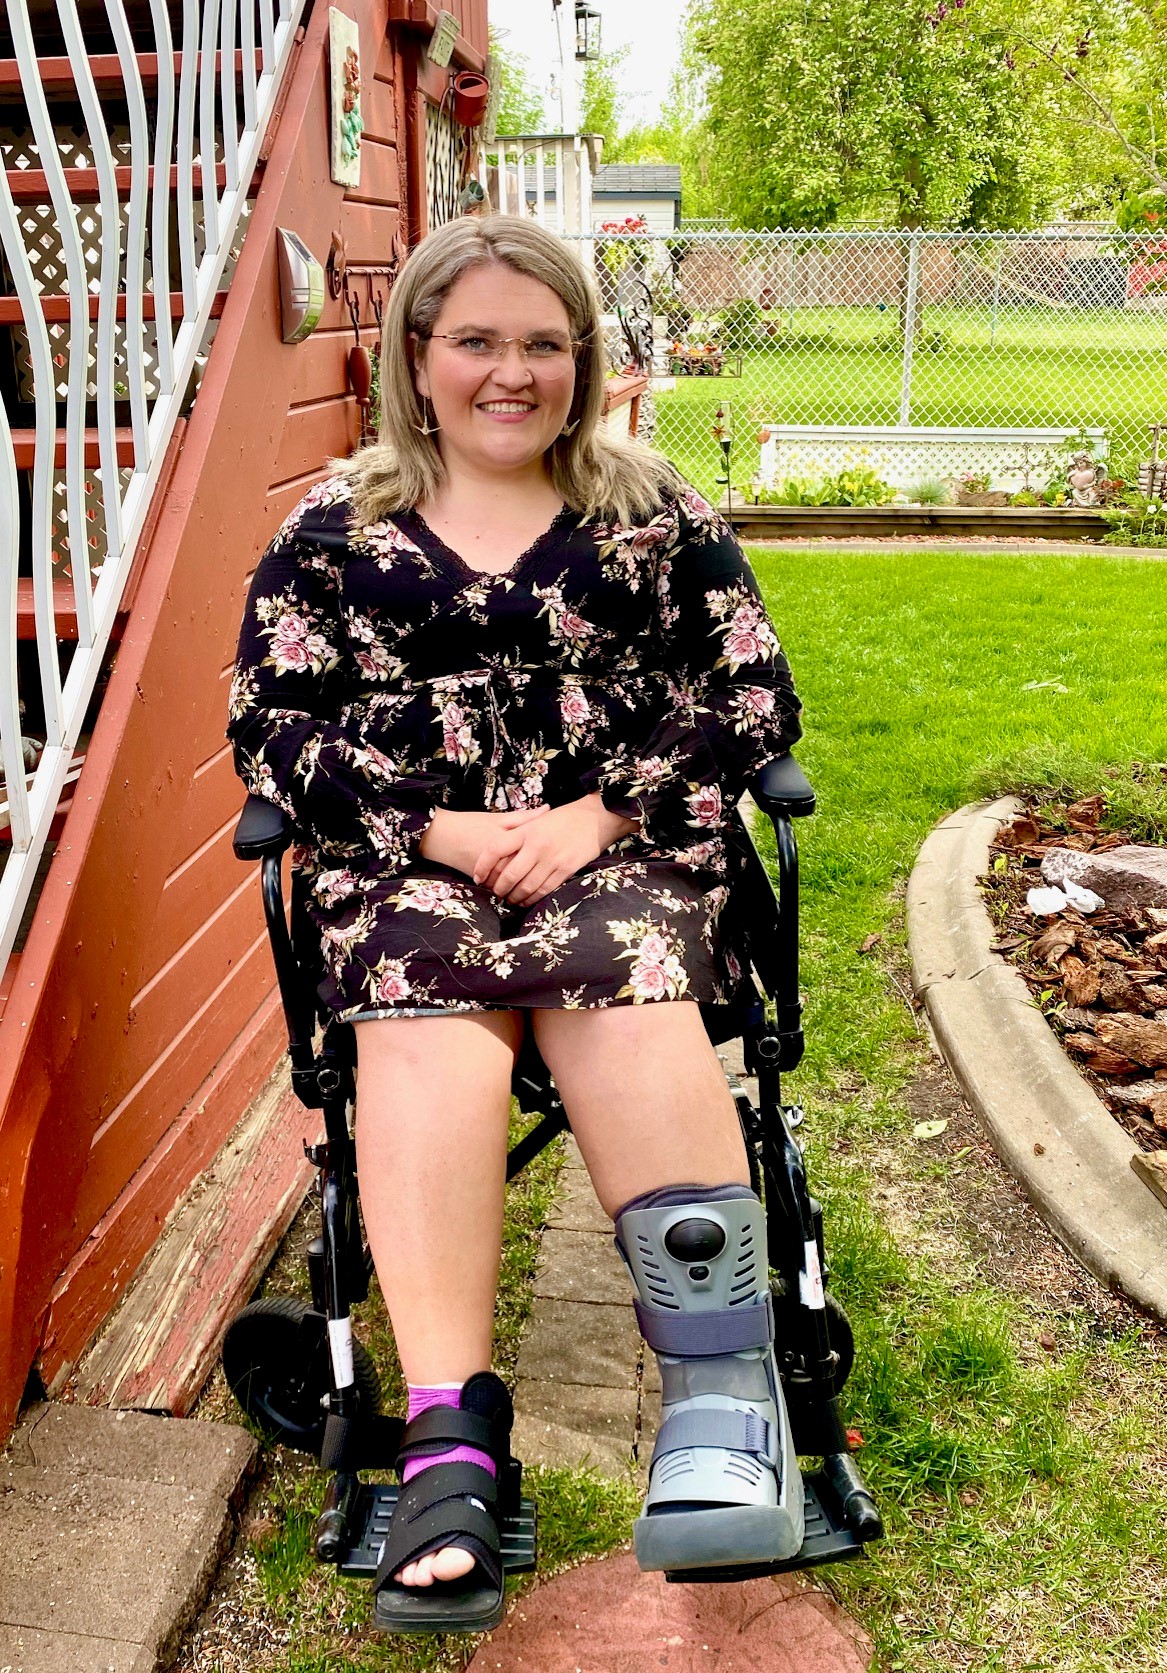 Smiling woman with long blonde hair wearing glasses, long-sleeved black patterned dress, foot brace and ankle brace, sits in wheelchair on grass lawn in backyard next to a flight of stairs with white handrail